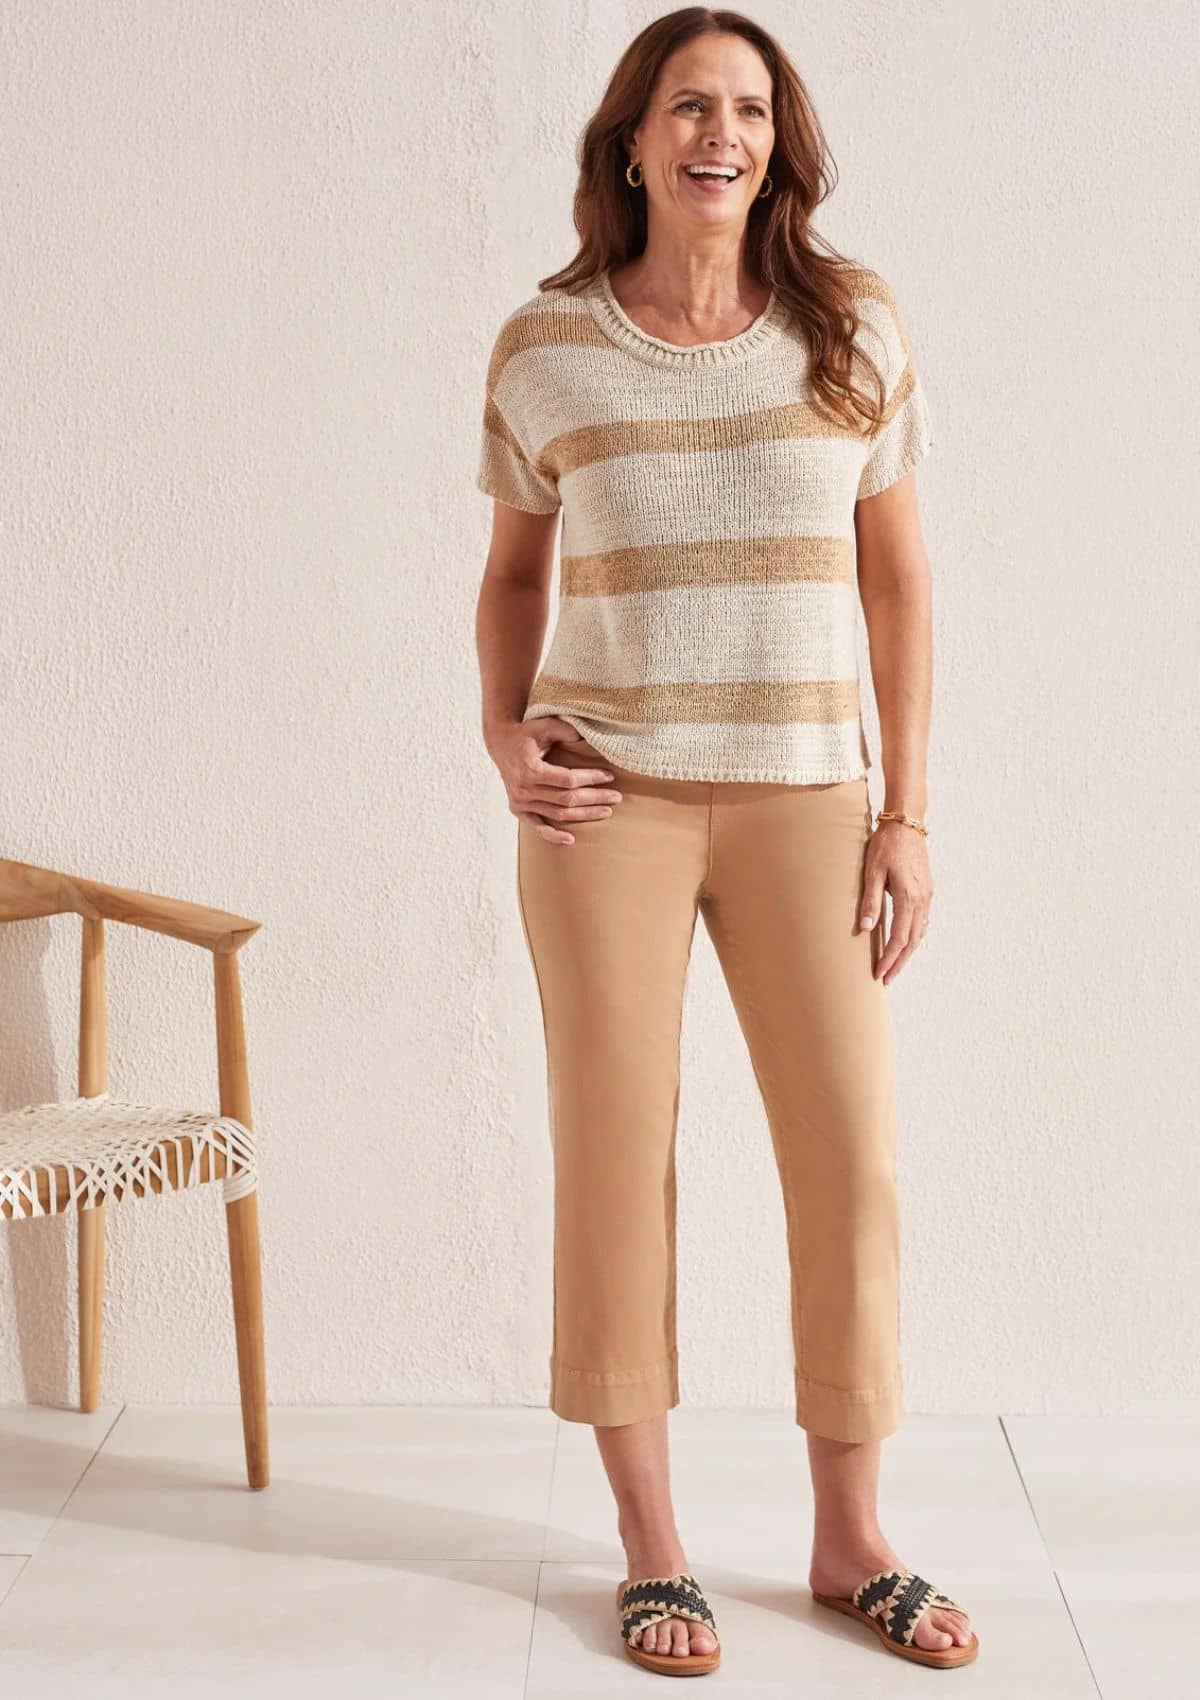 Thick white and thin tan horizontal stripes. Paired with gold jewelry.